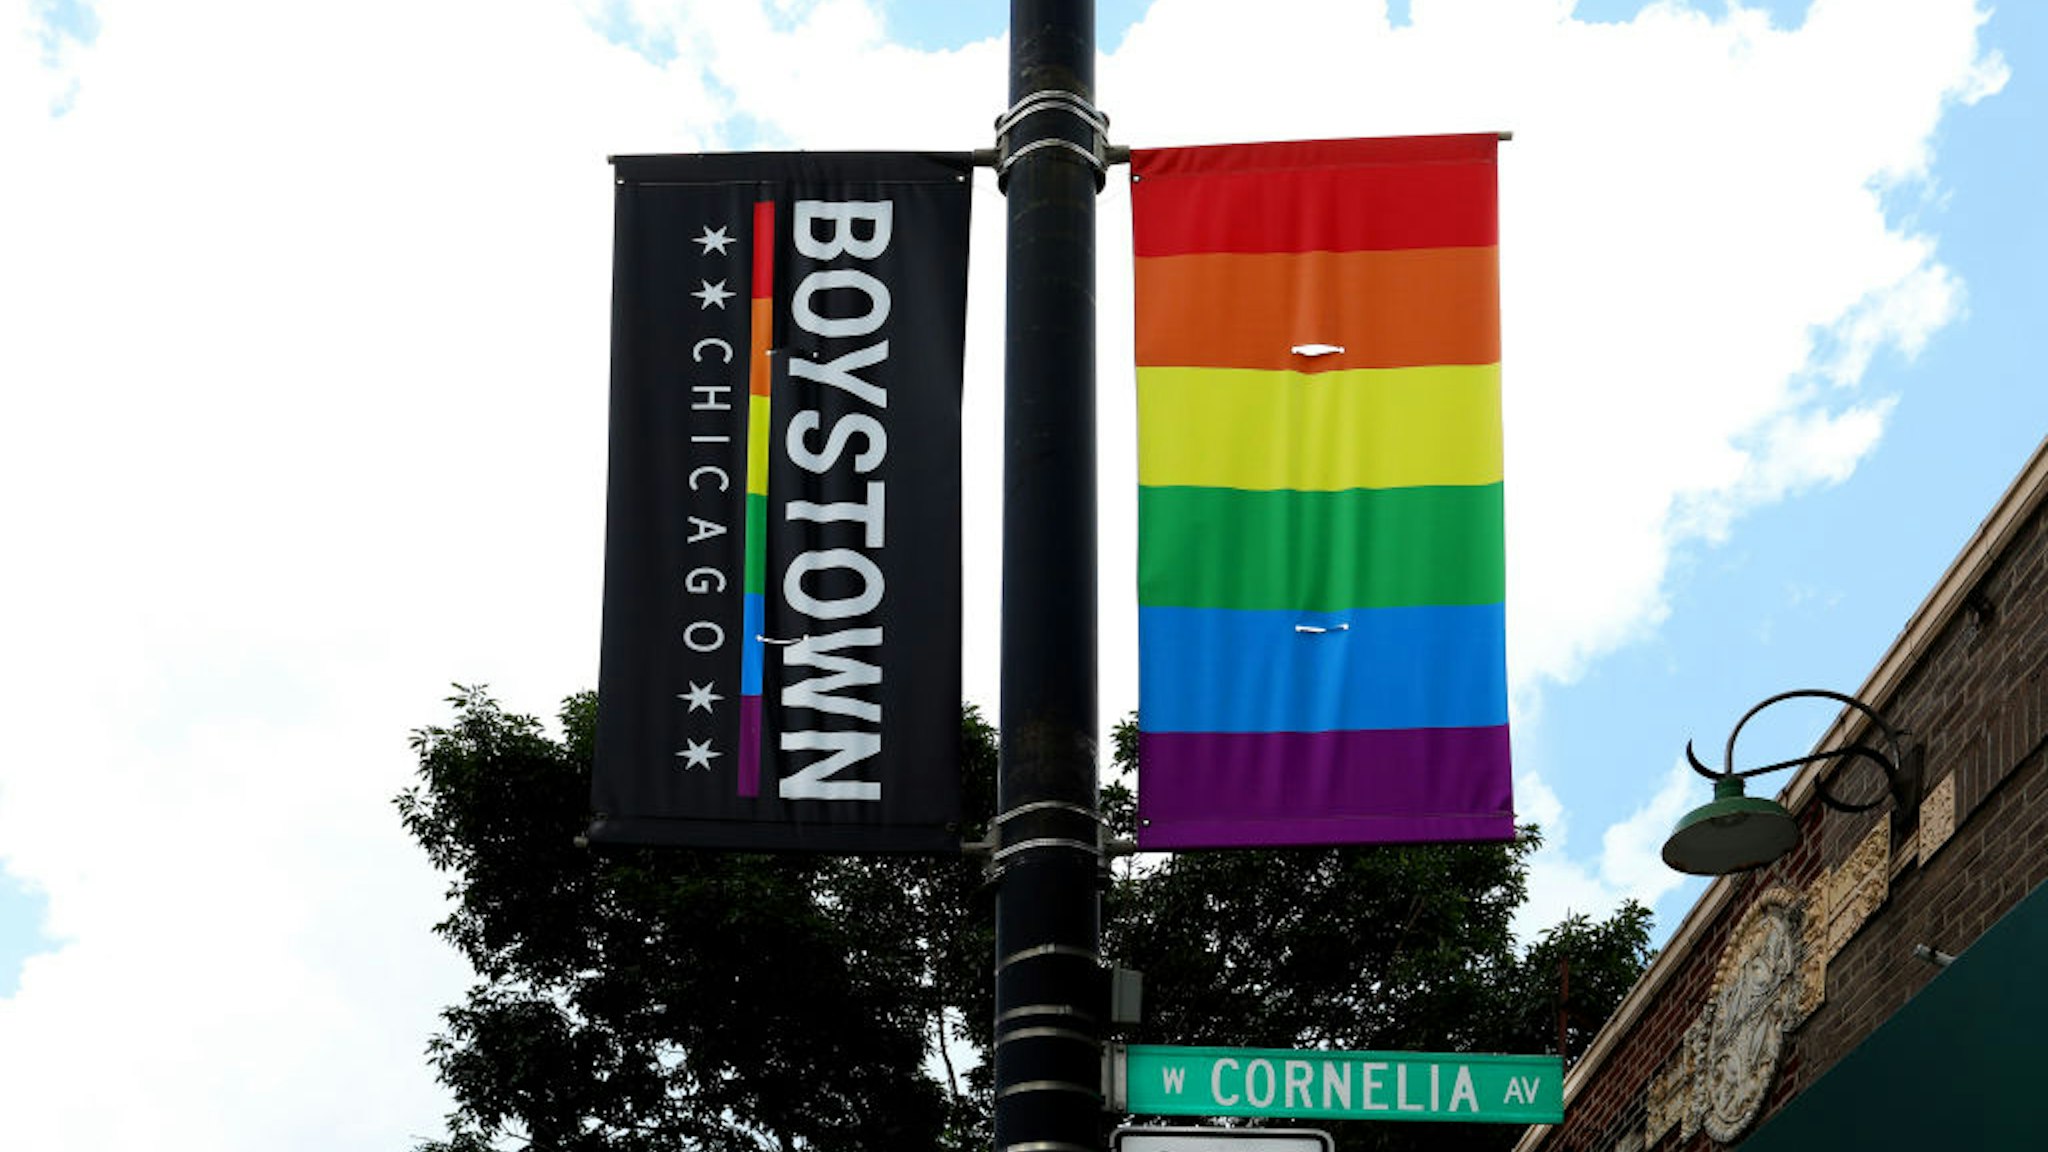 CHICAGO - JULY 13: A Boystown Chicago banner hangs along Cornelia Avenue in the Boystown Lakeview neighborhood in Chicago, Illinois on July 13, 2019. (Photo By Raymond Boyd/Getty Images)